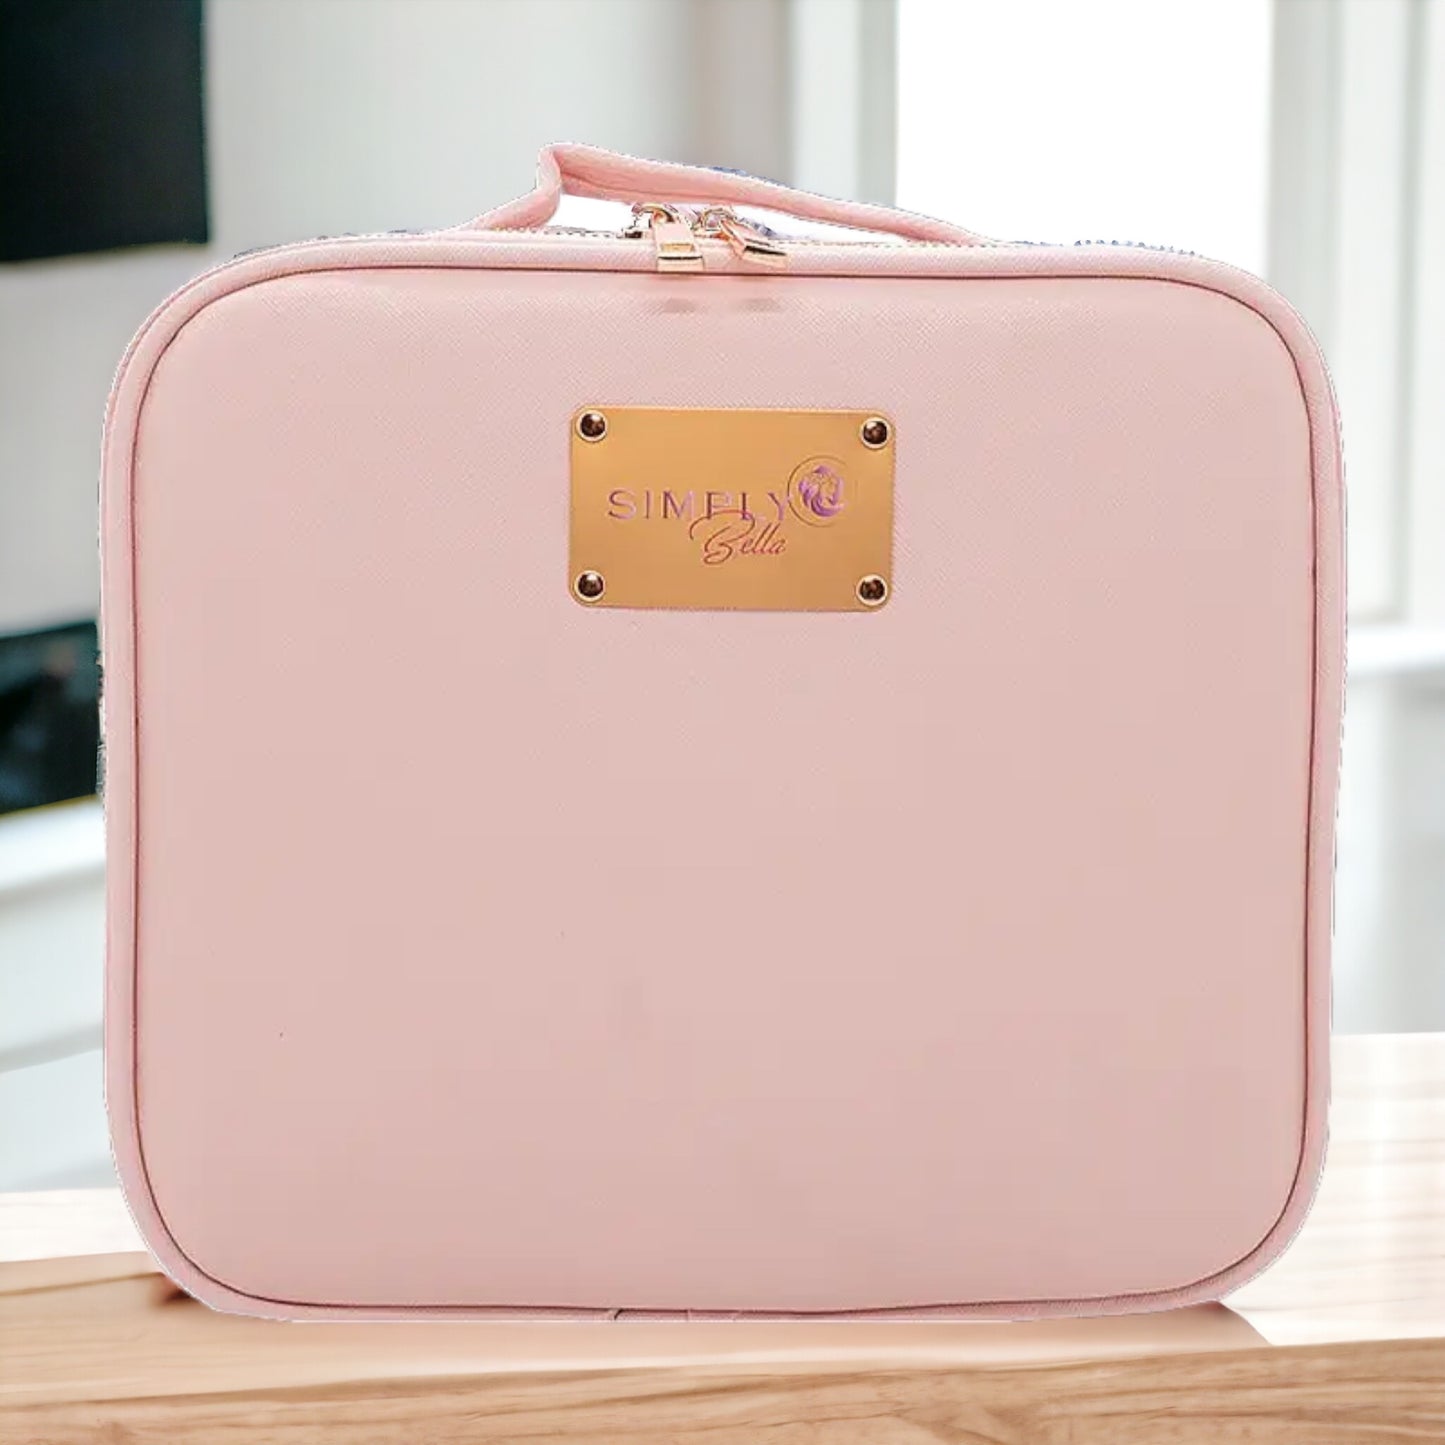 Pink Travel Bag with Light - Marisa's Shopping Network 